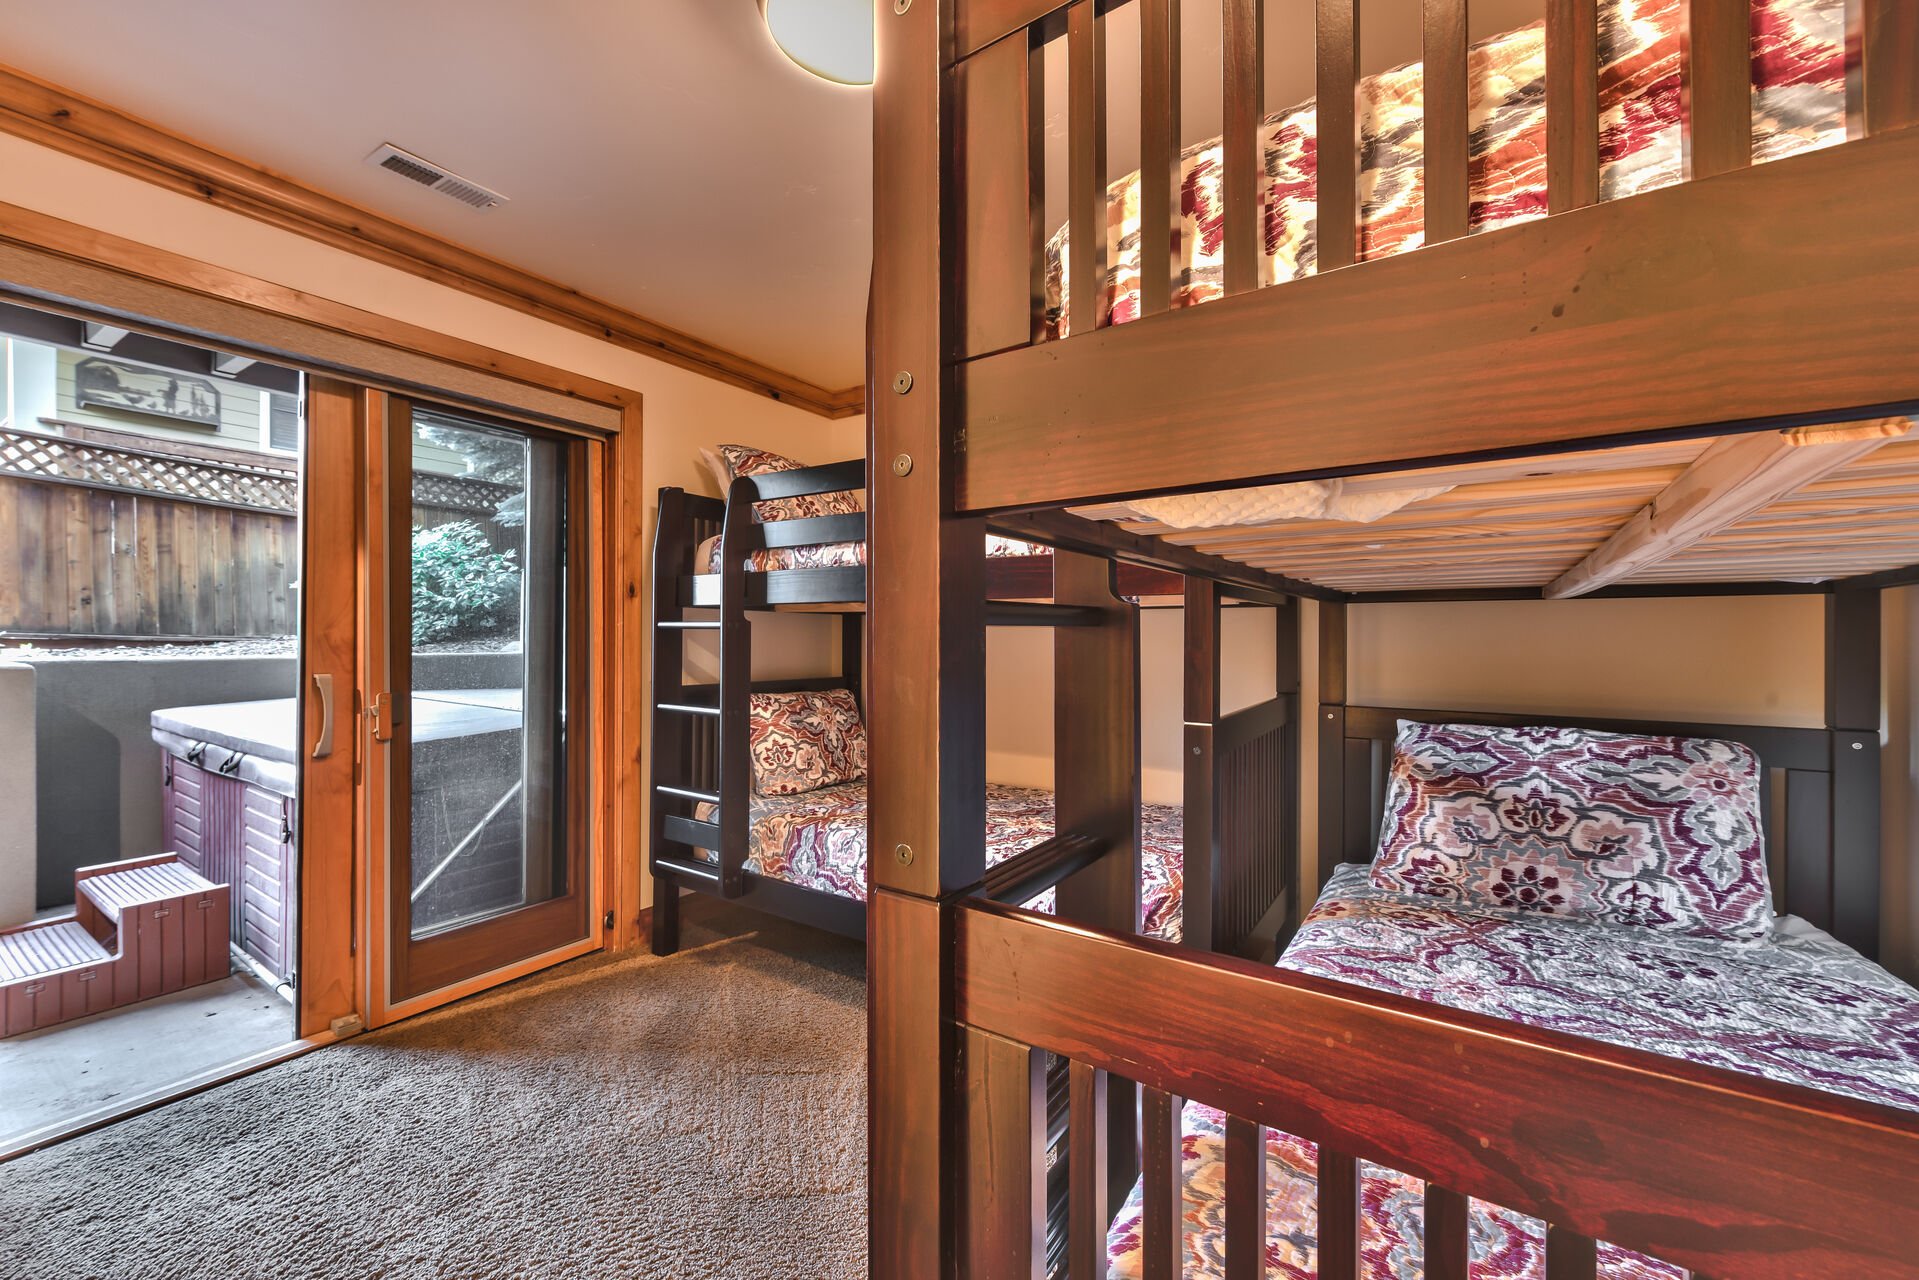 Level 1 Bedroom 3 with Two Twin over Twin Bunk Beds with a Private Bath and Patio Access with Hot Tub